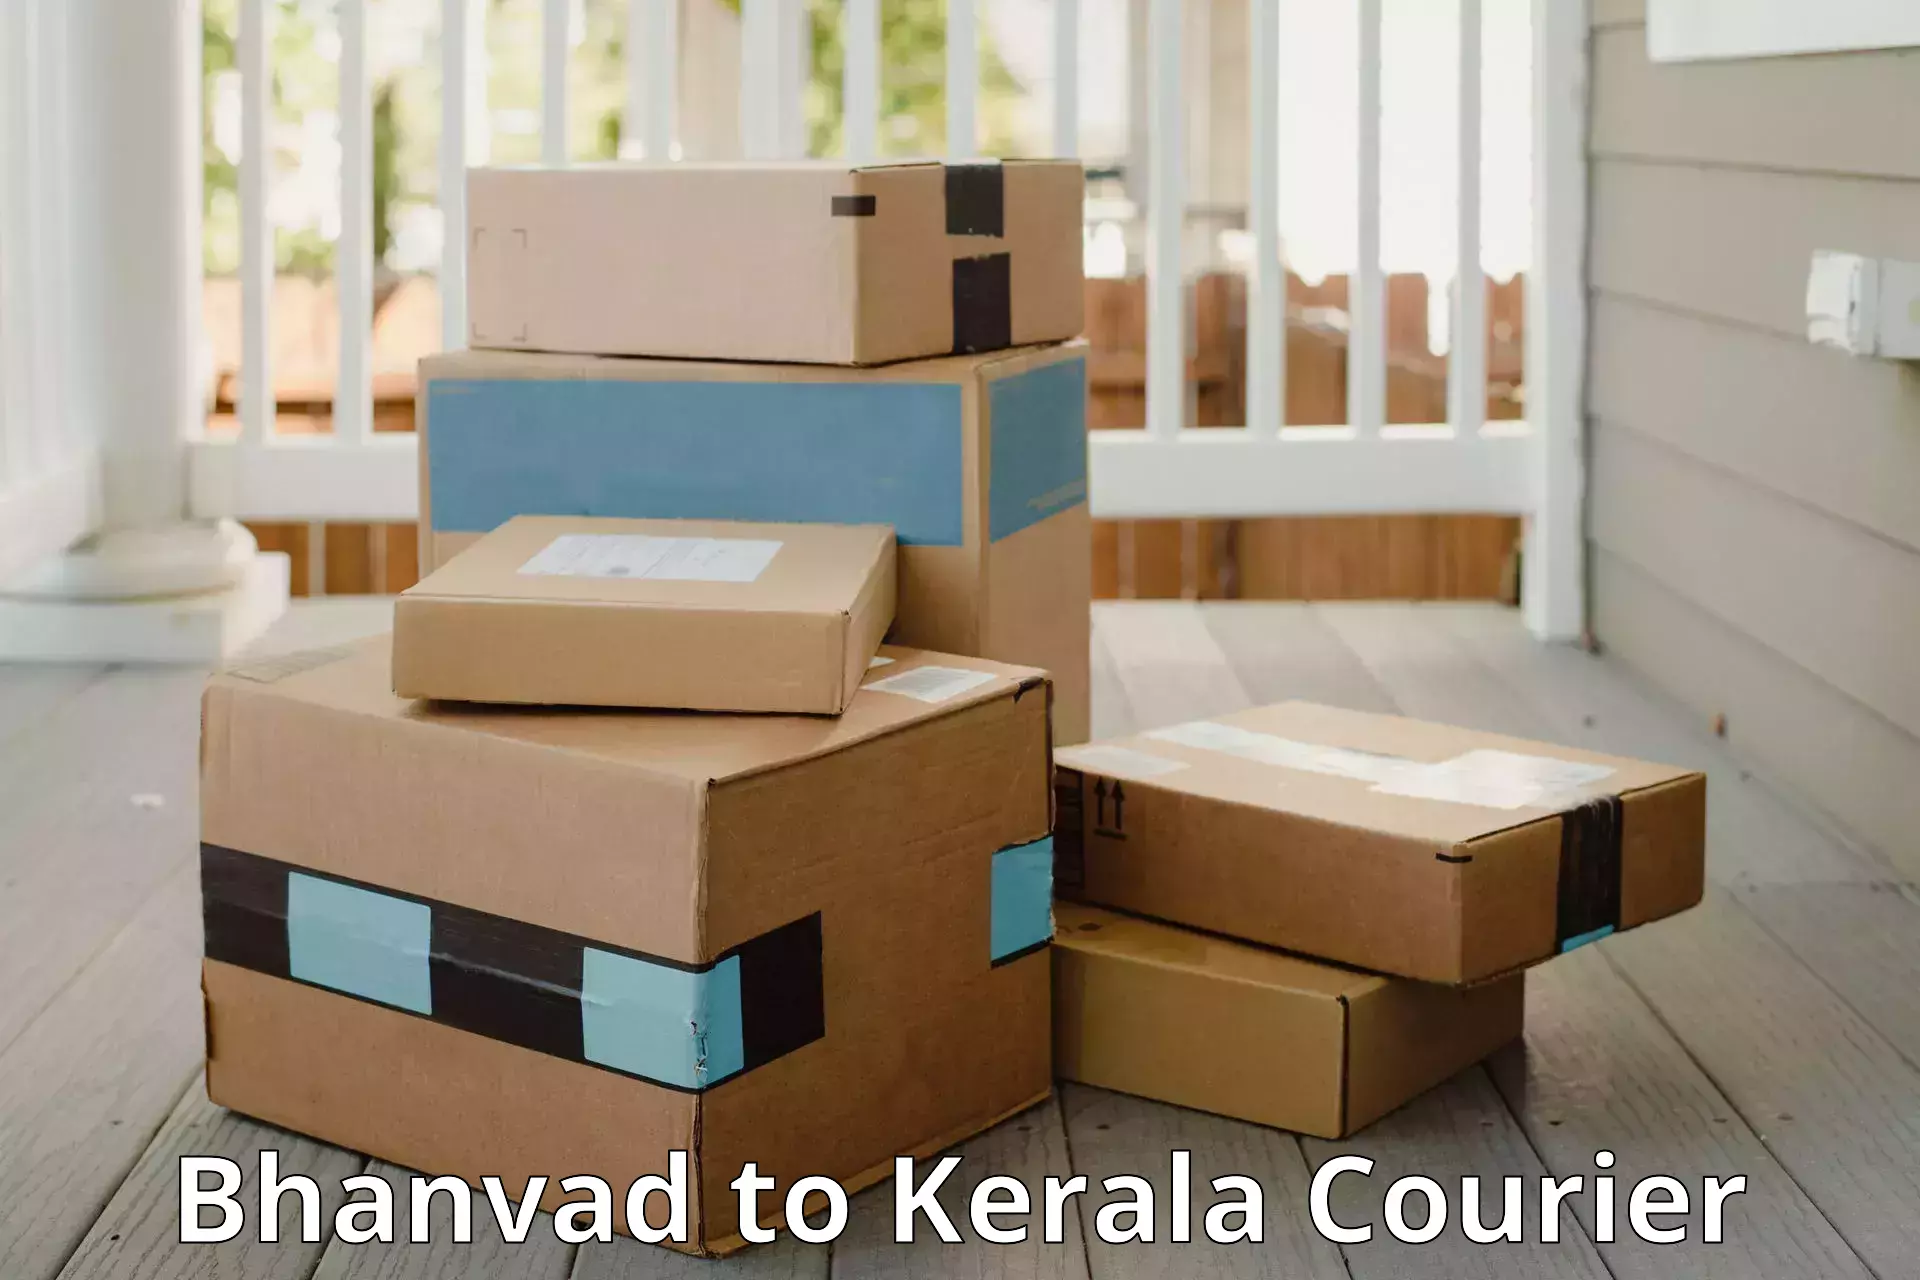 Doorstep luggage collection in Bhanvad to Kerala